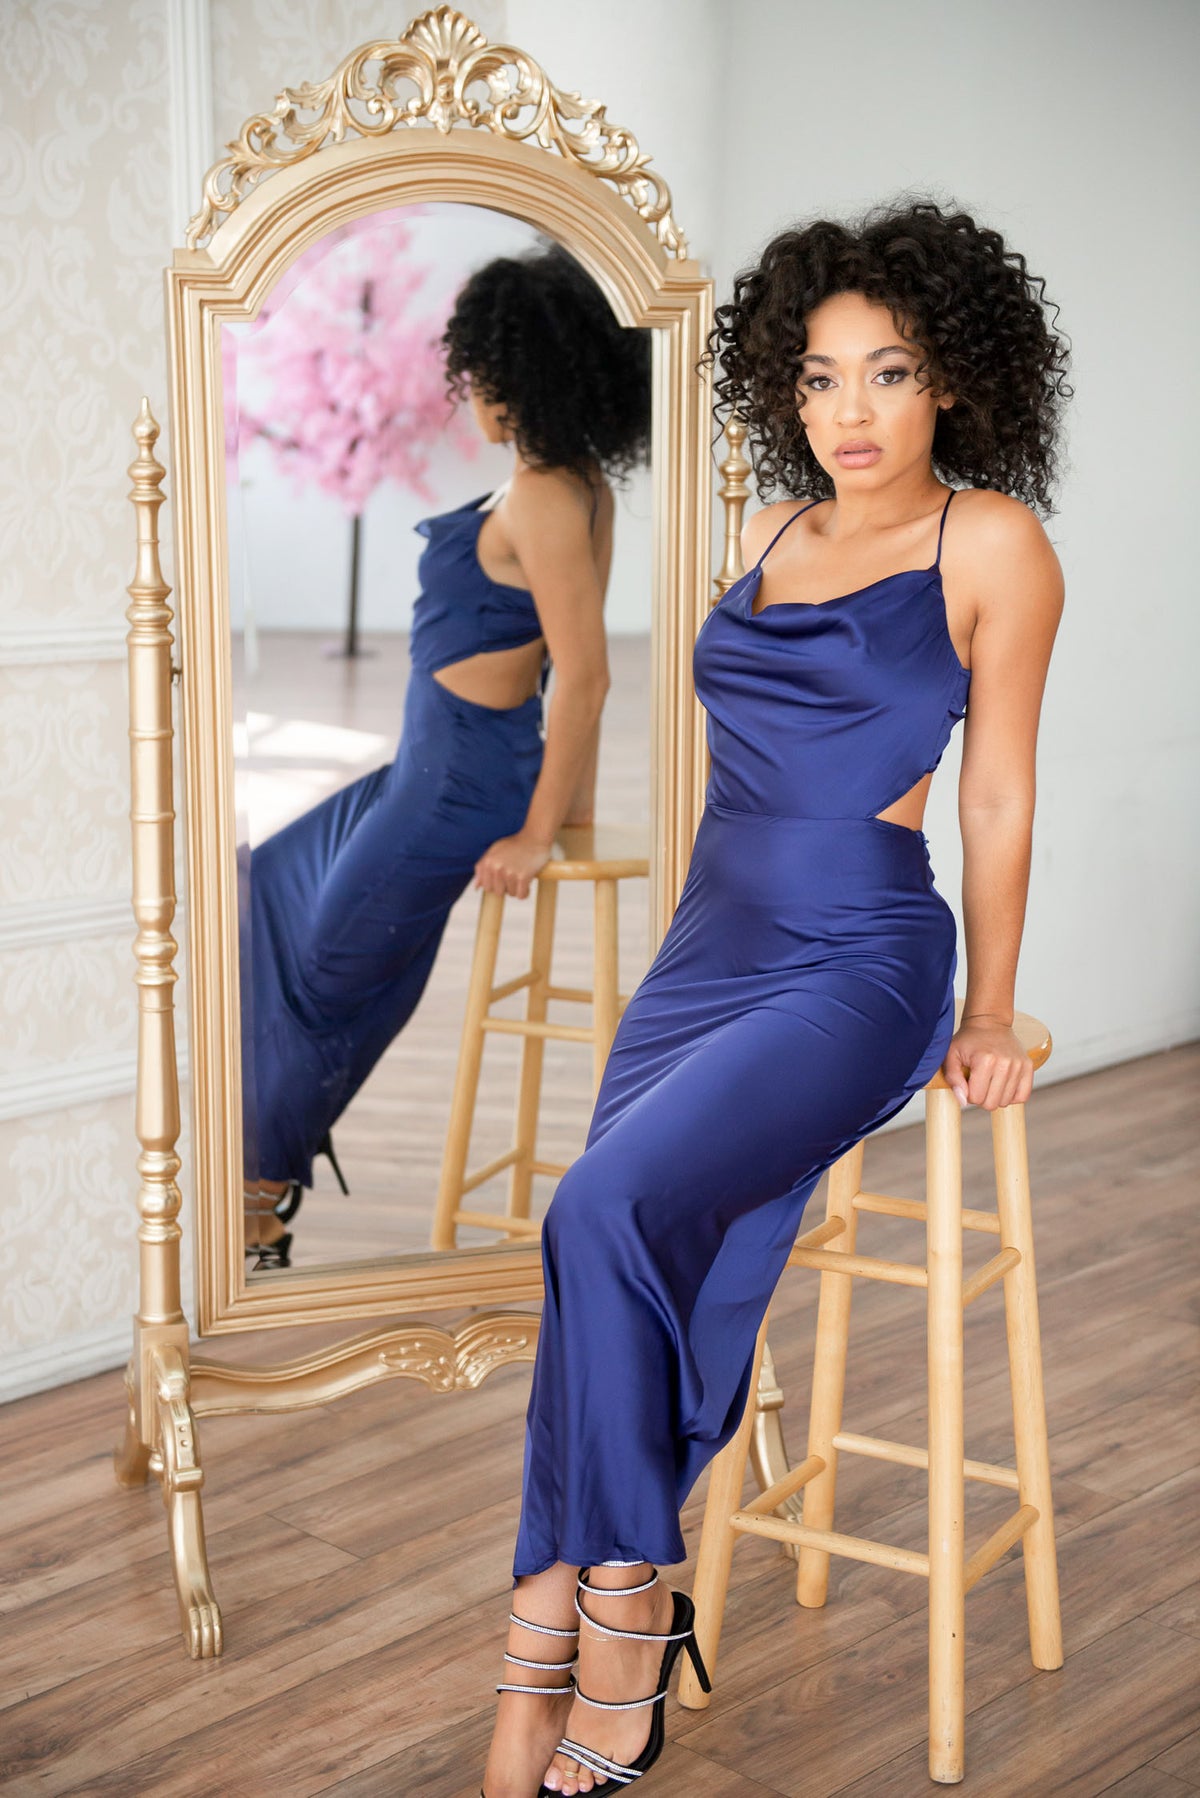 Midnight blue Satin slip maxi dress with adjustable straps and back/ side cutout.